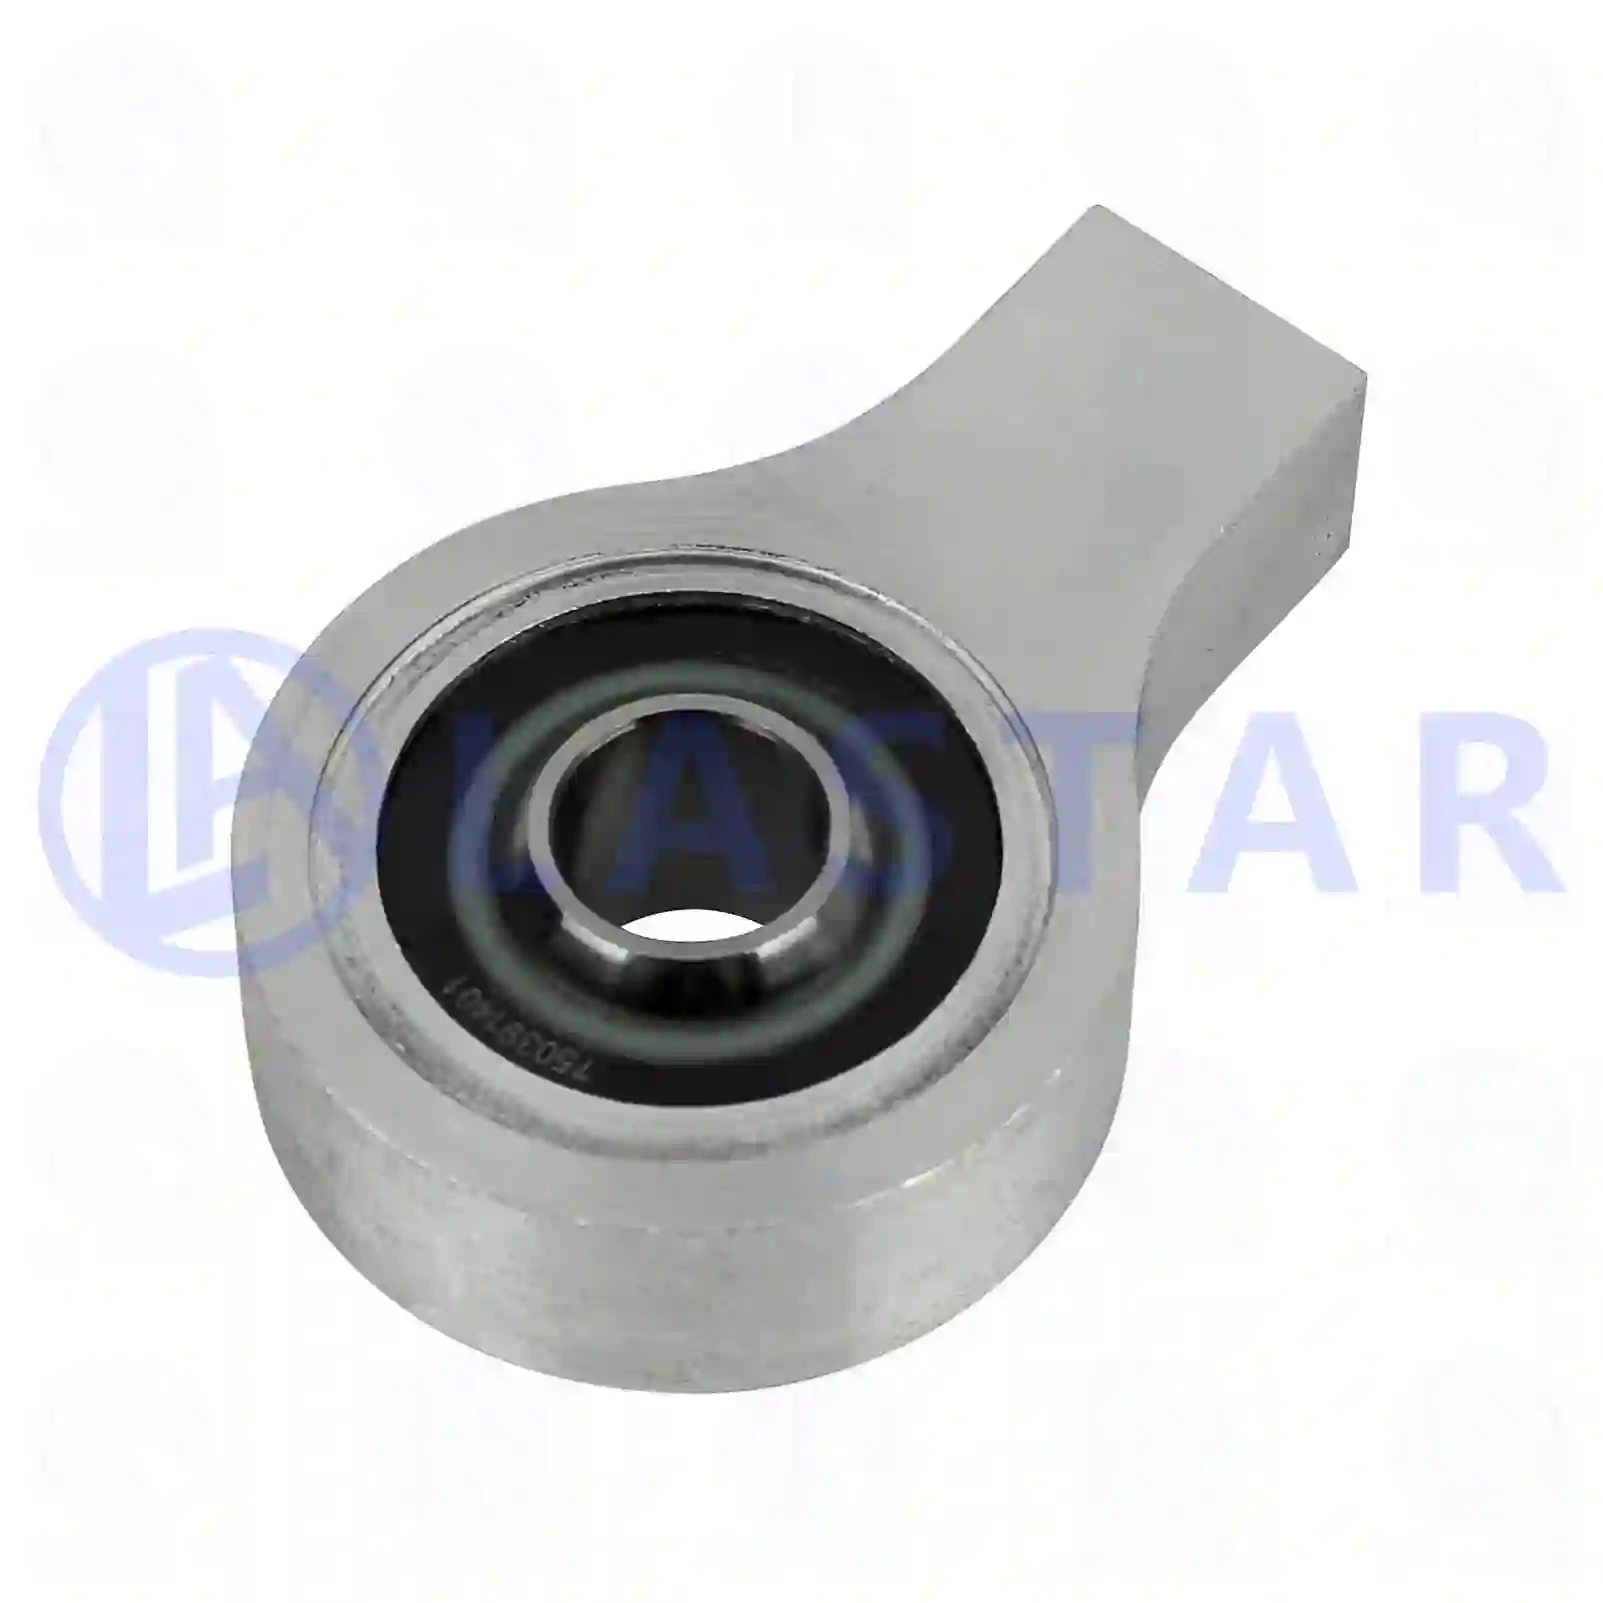 Shock Absorber Bearing joint, cabin shock absorber, la no: 77735332 ,  oem no:1364293, 1443114, 1504160, 1744210, 504160, ZG40851-0008 Lastar Spare Part | Truck Spare Parts, Auotomotive Spare Parts